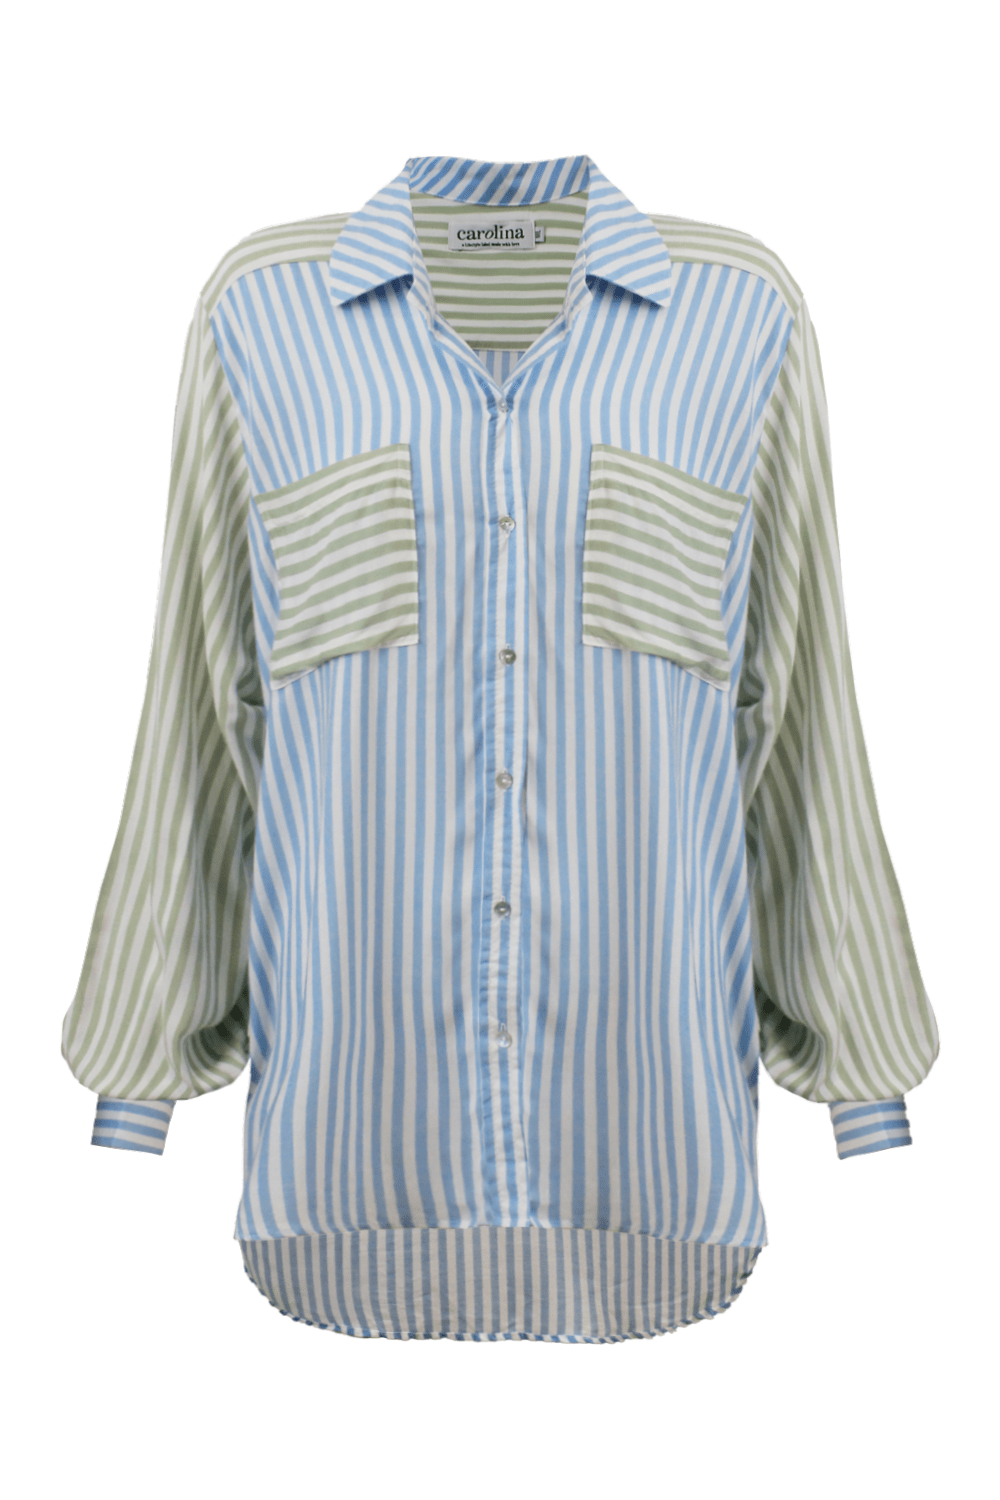 Marinetta Long Sleeve Collared Shirt Striped Sky Blue/Olive Tops